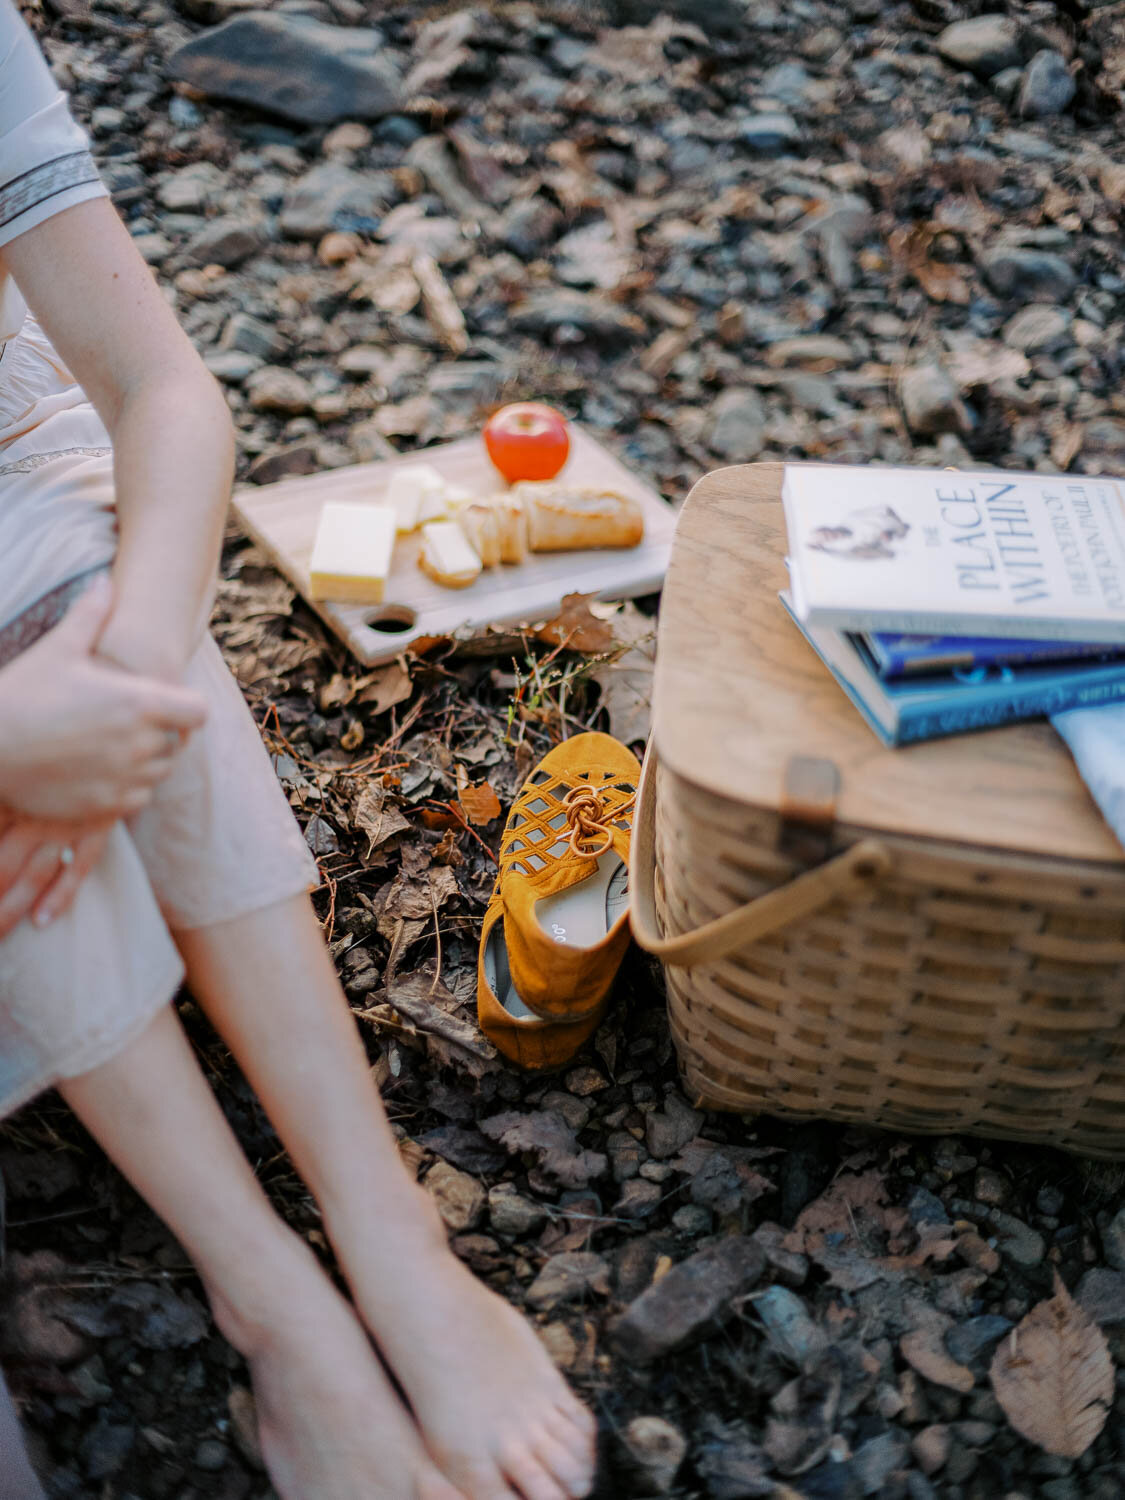 shoes-picnic-basket-and-charcuterie-board-with-cheese-bread-and-an-apple-on-riverbank-during-engagement-session-in-charlottesville-virginia.jpg